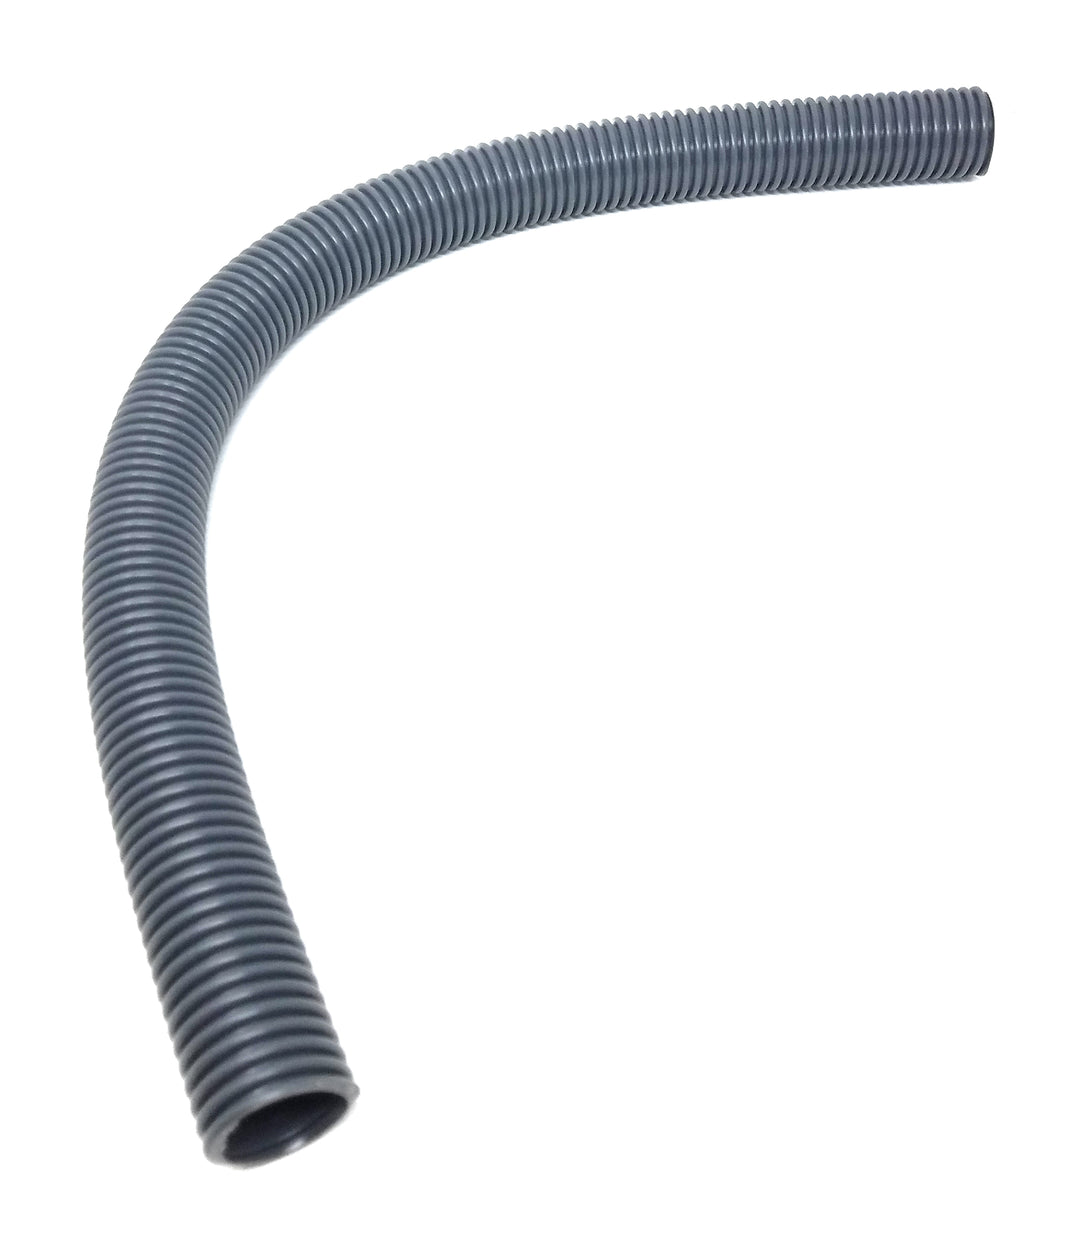 Top View of Pentair Kreepy Krauly Legend II Feed Hose - Gray - 2 ft. Section - ePoolSupply